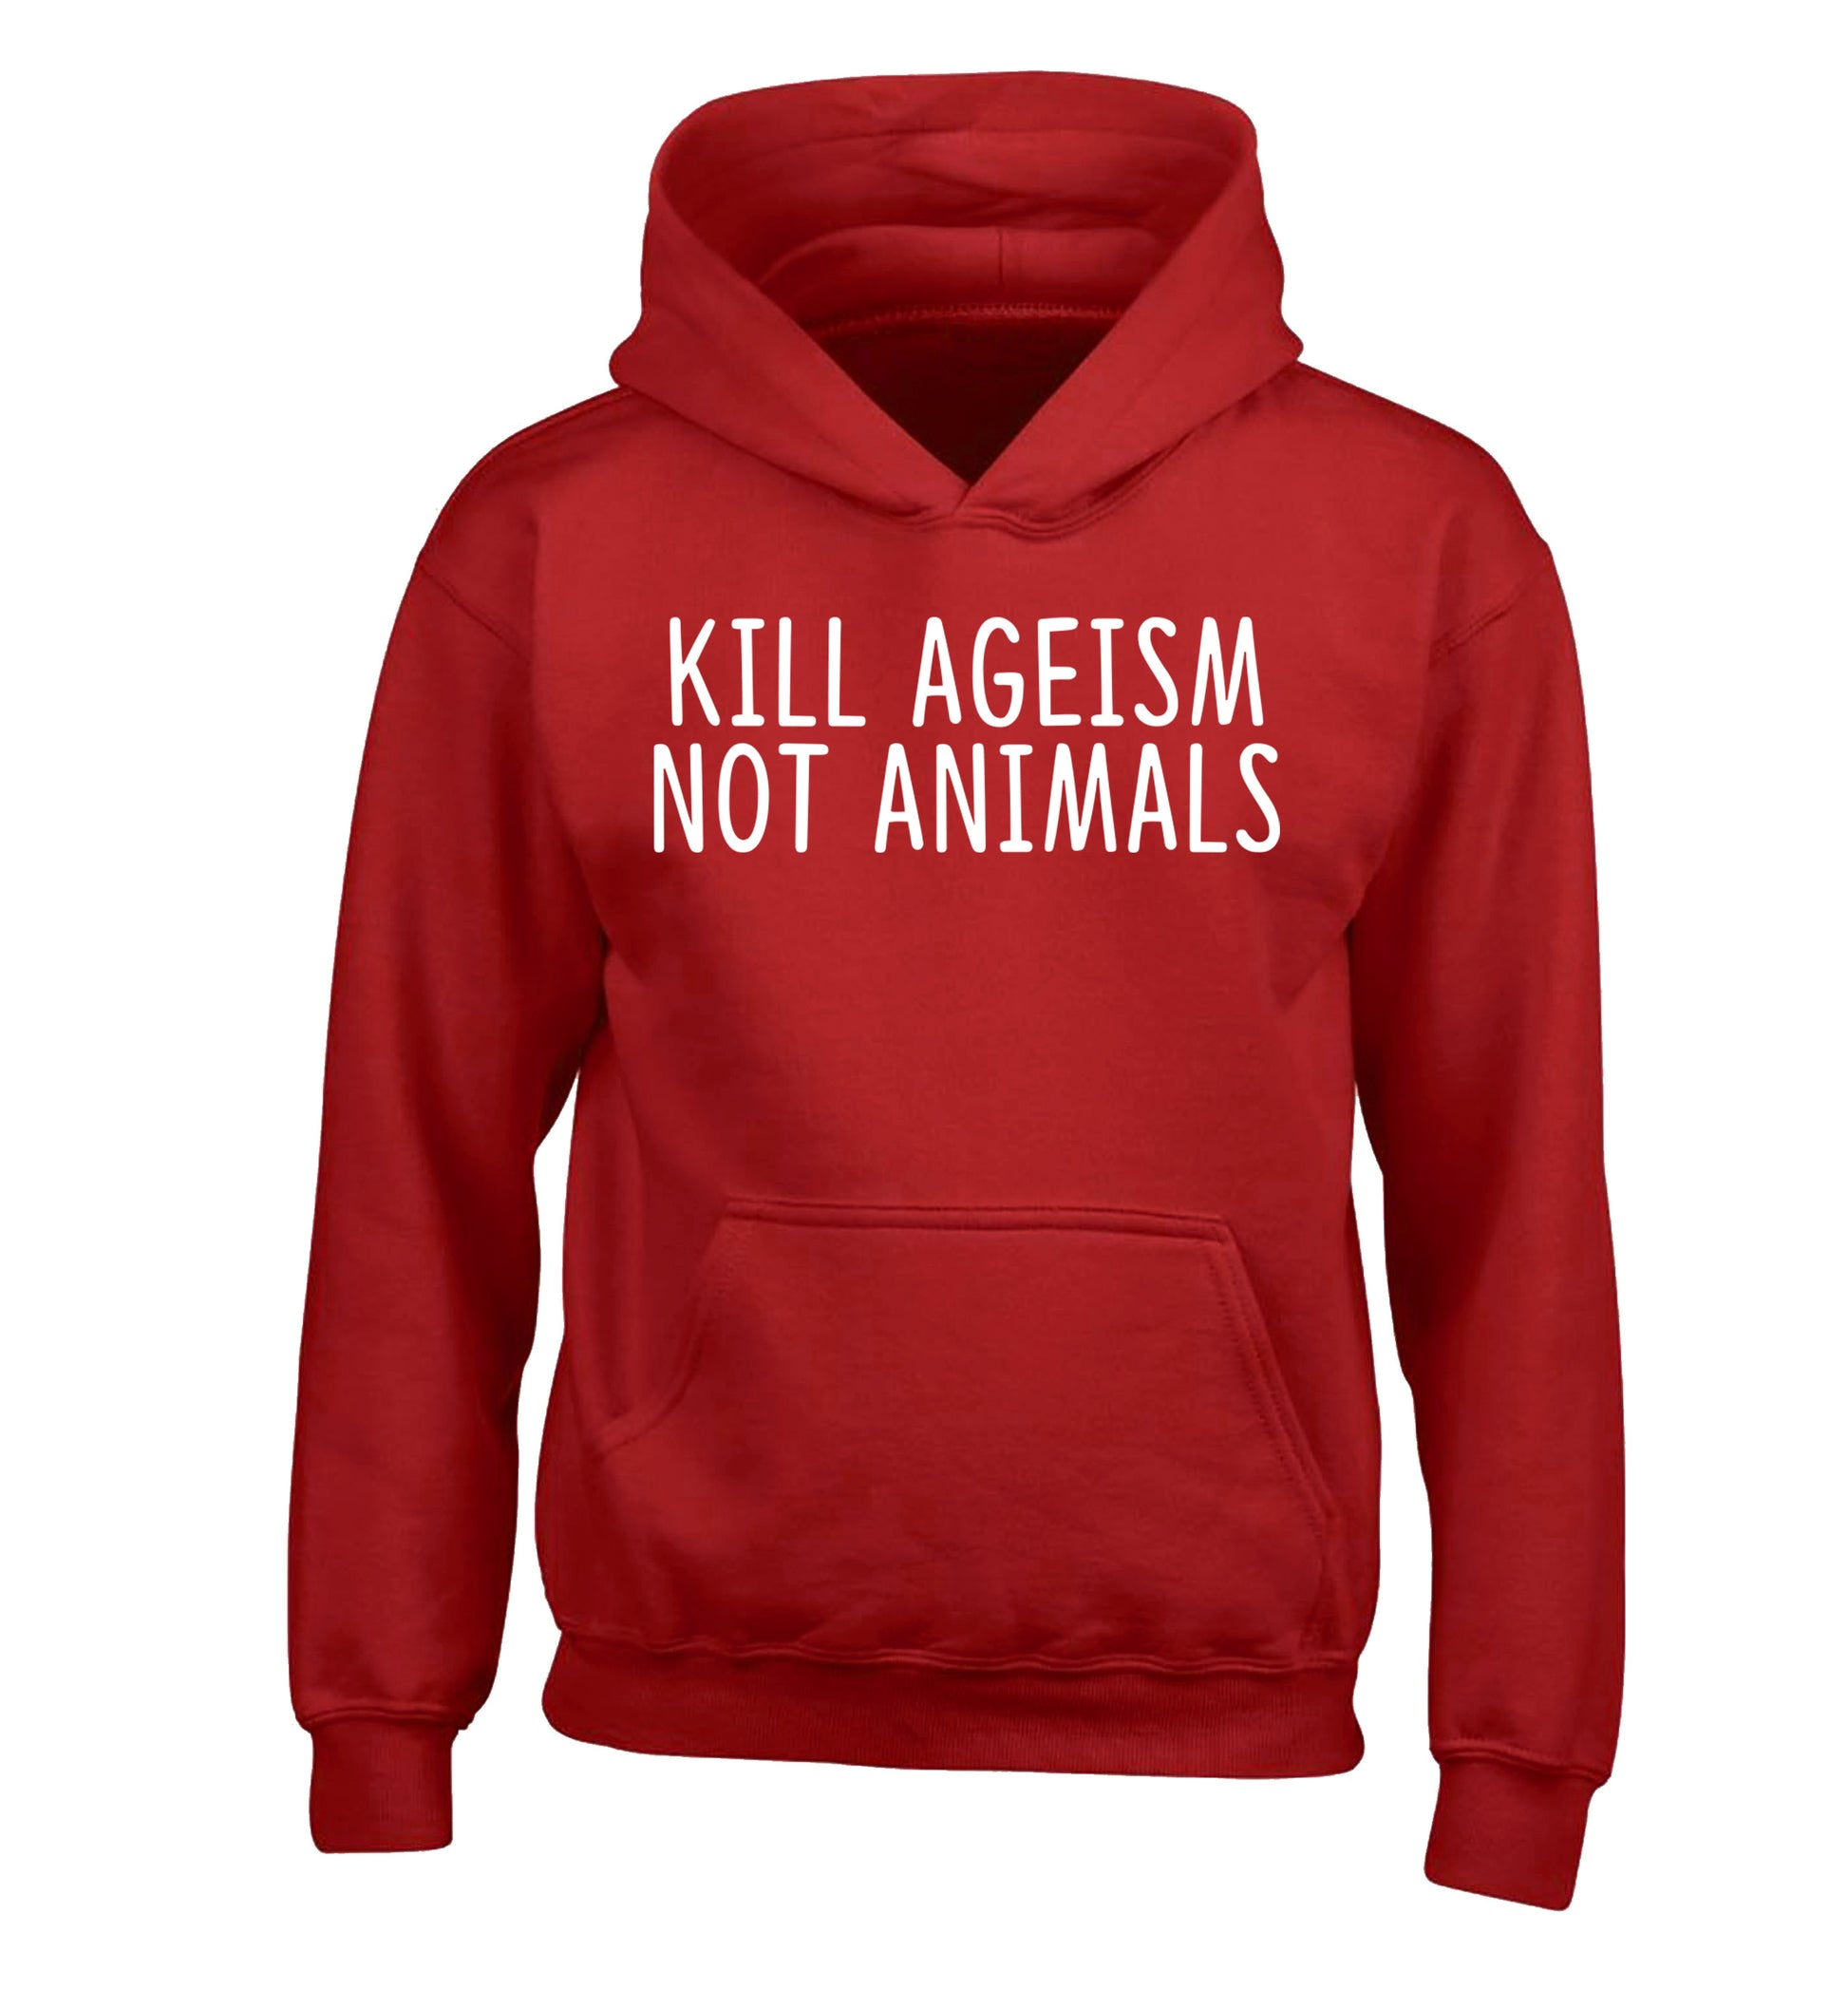 Kill Ageism Not Animals children's red hoodie 12-13 Years